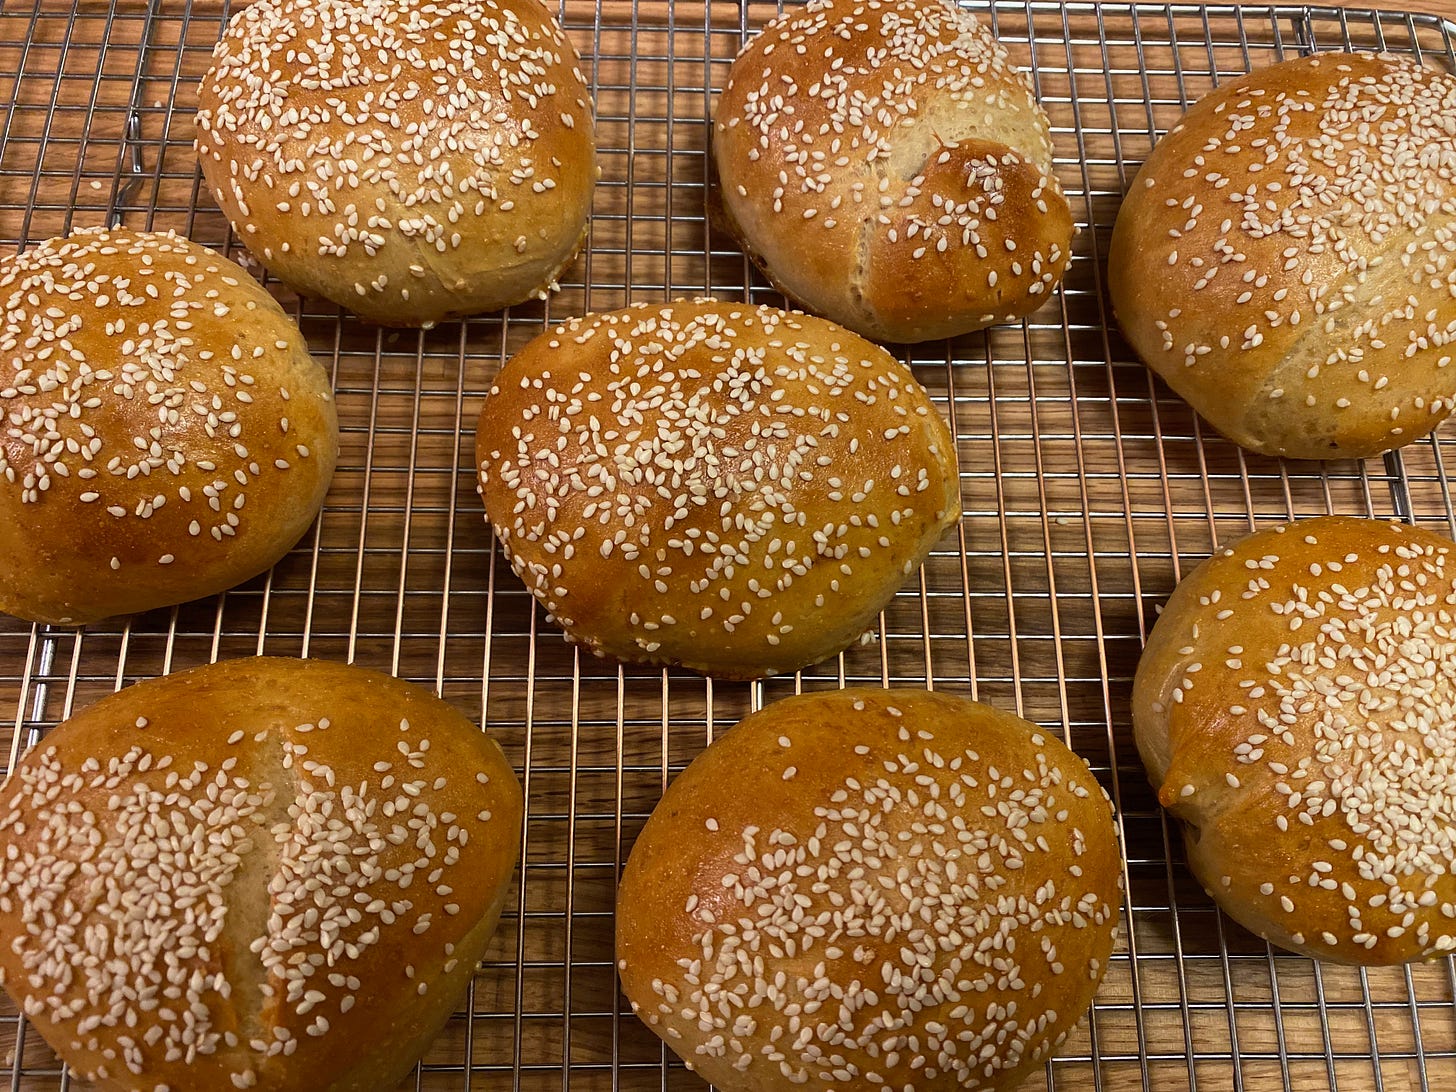 Eight round, golden-brown buns covered in sesame seeds sit on a metal cooling rack.